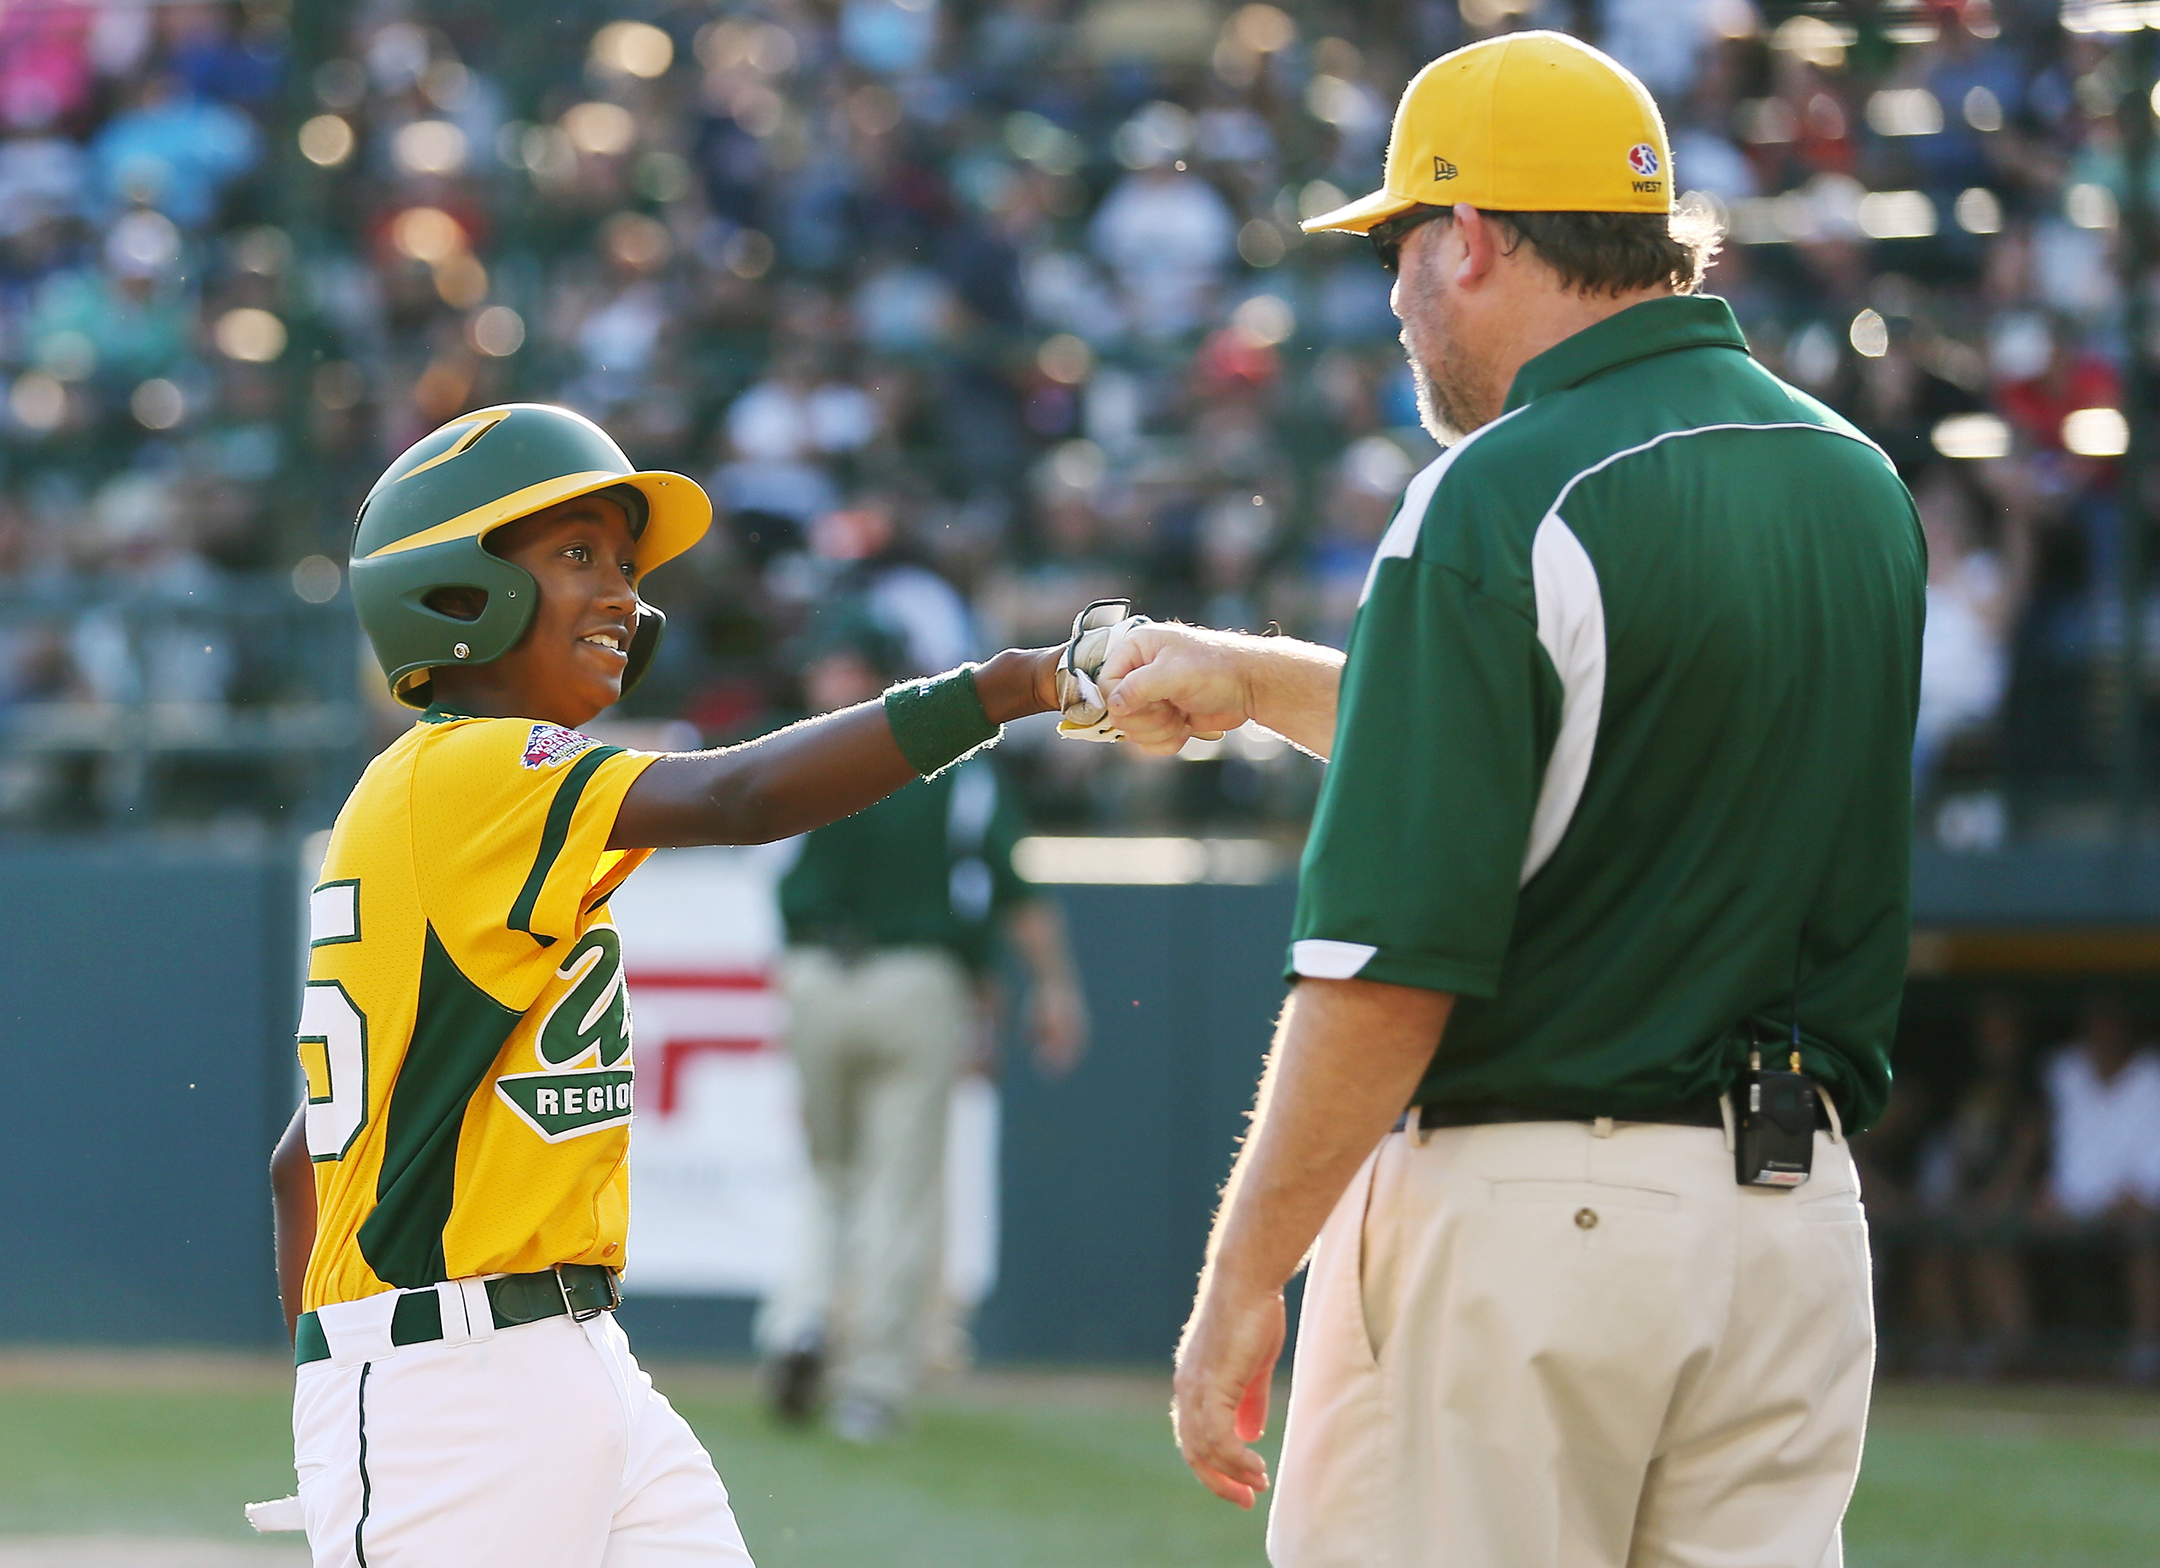 Young black baseball player fist bumps his older male white coach